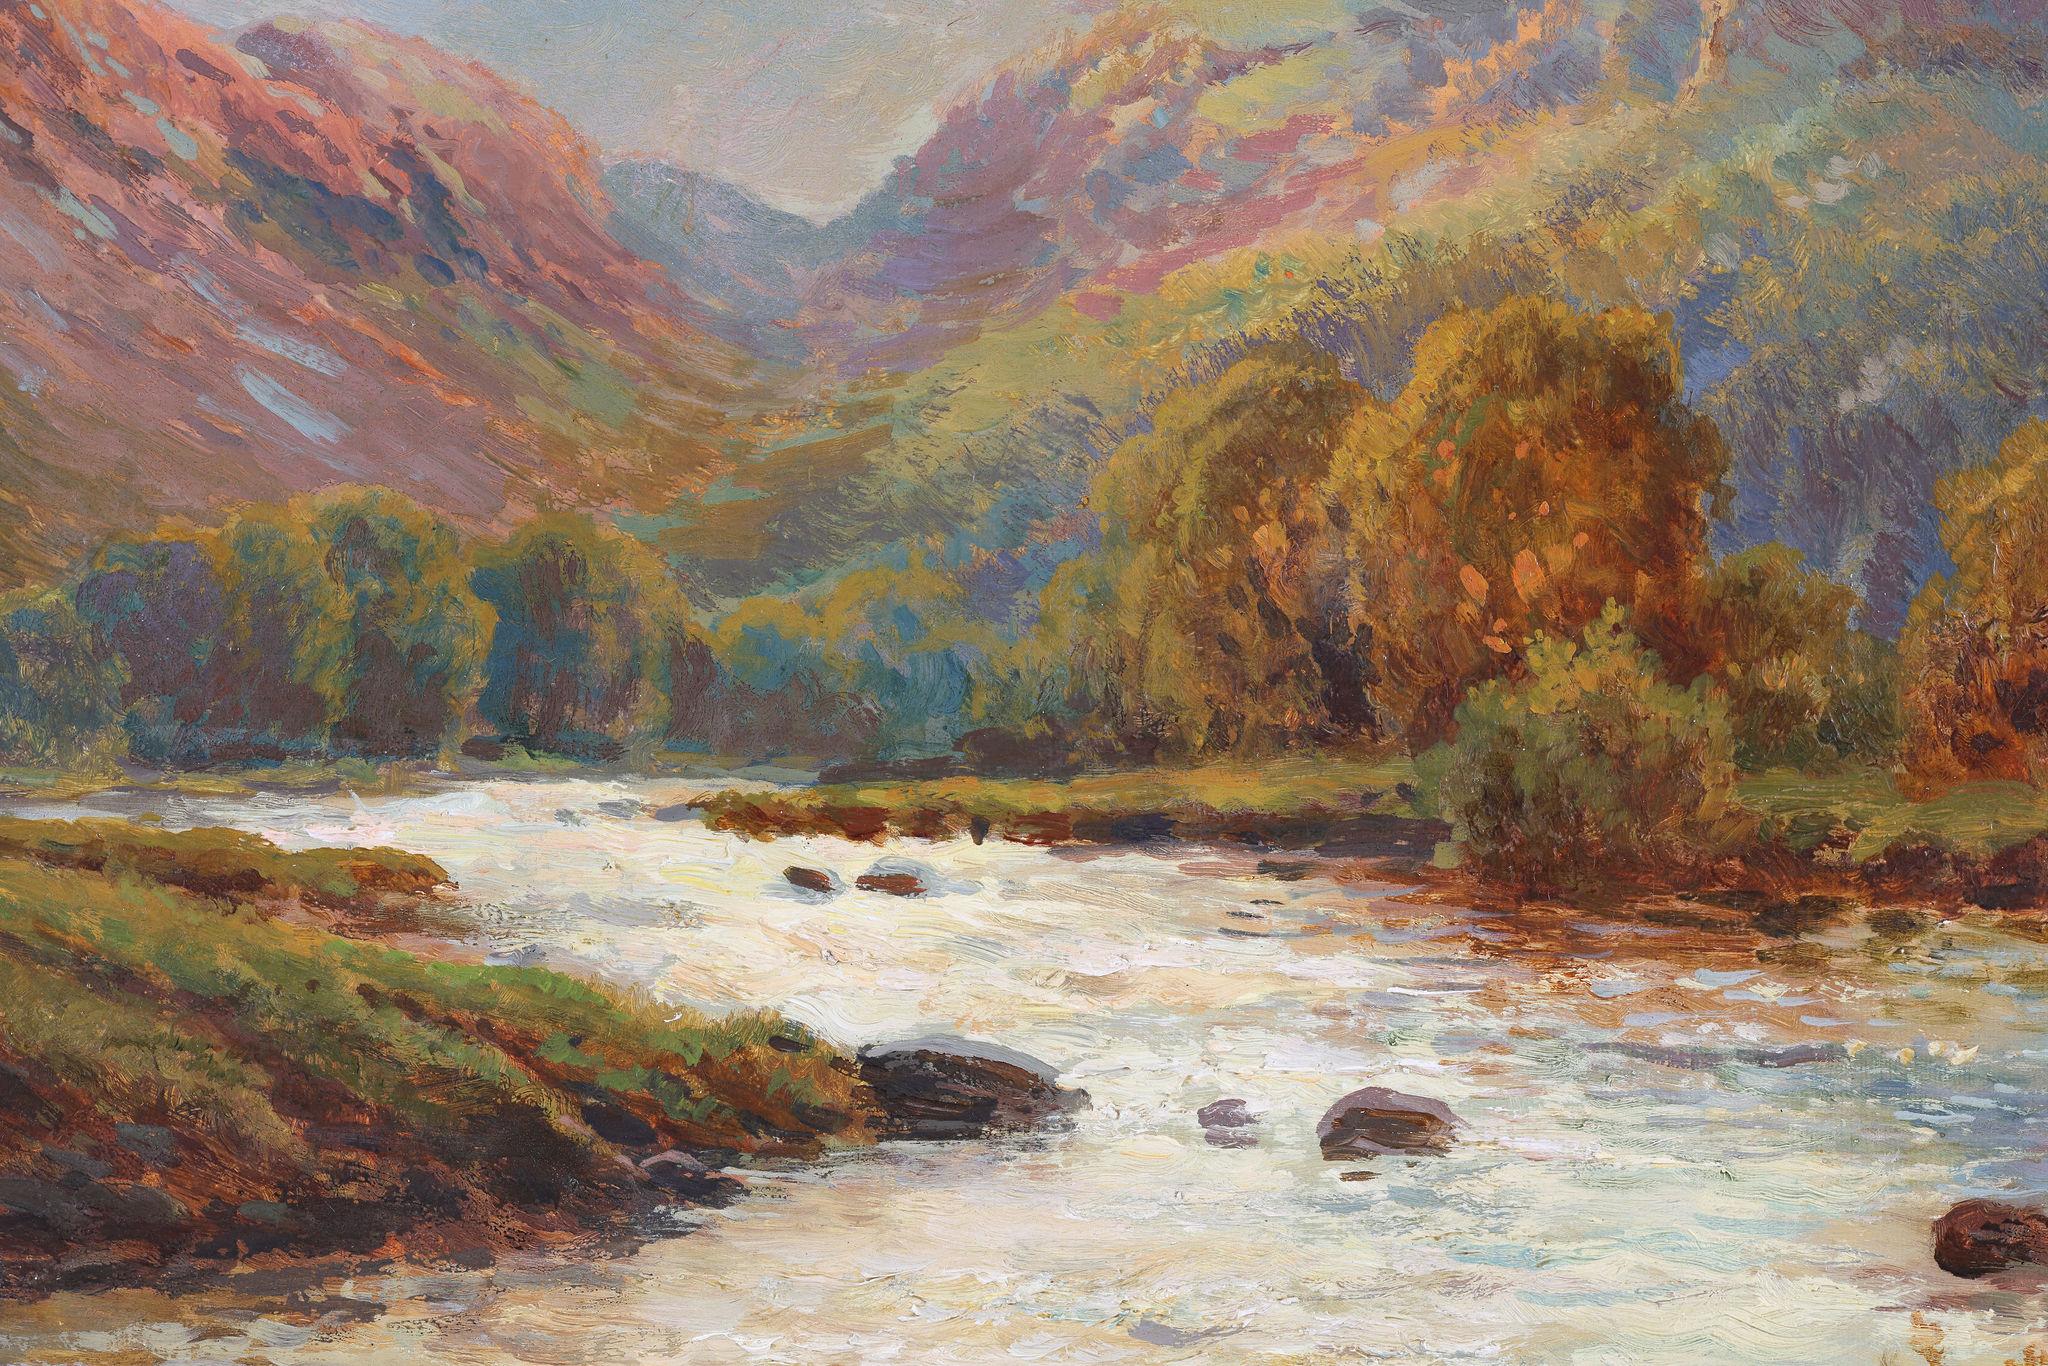 Alfred Fontville De BREANSKI
A typical example of De Breanski's highland landscapes with a wonderful sunlight glow on the mountain tops and lovely attention to detail with beautiful sunlight hitting the impasto on the tips of the free flowing river